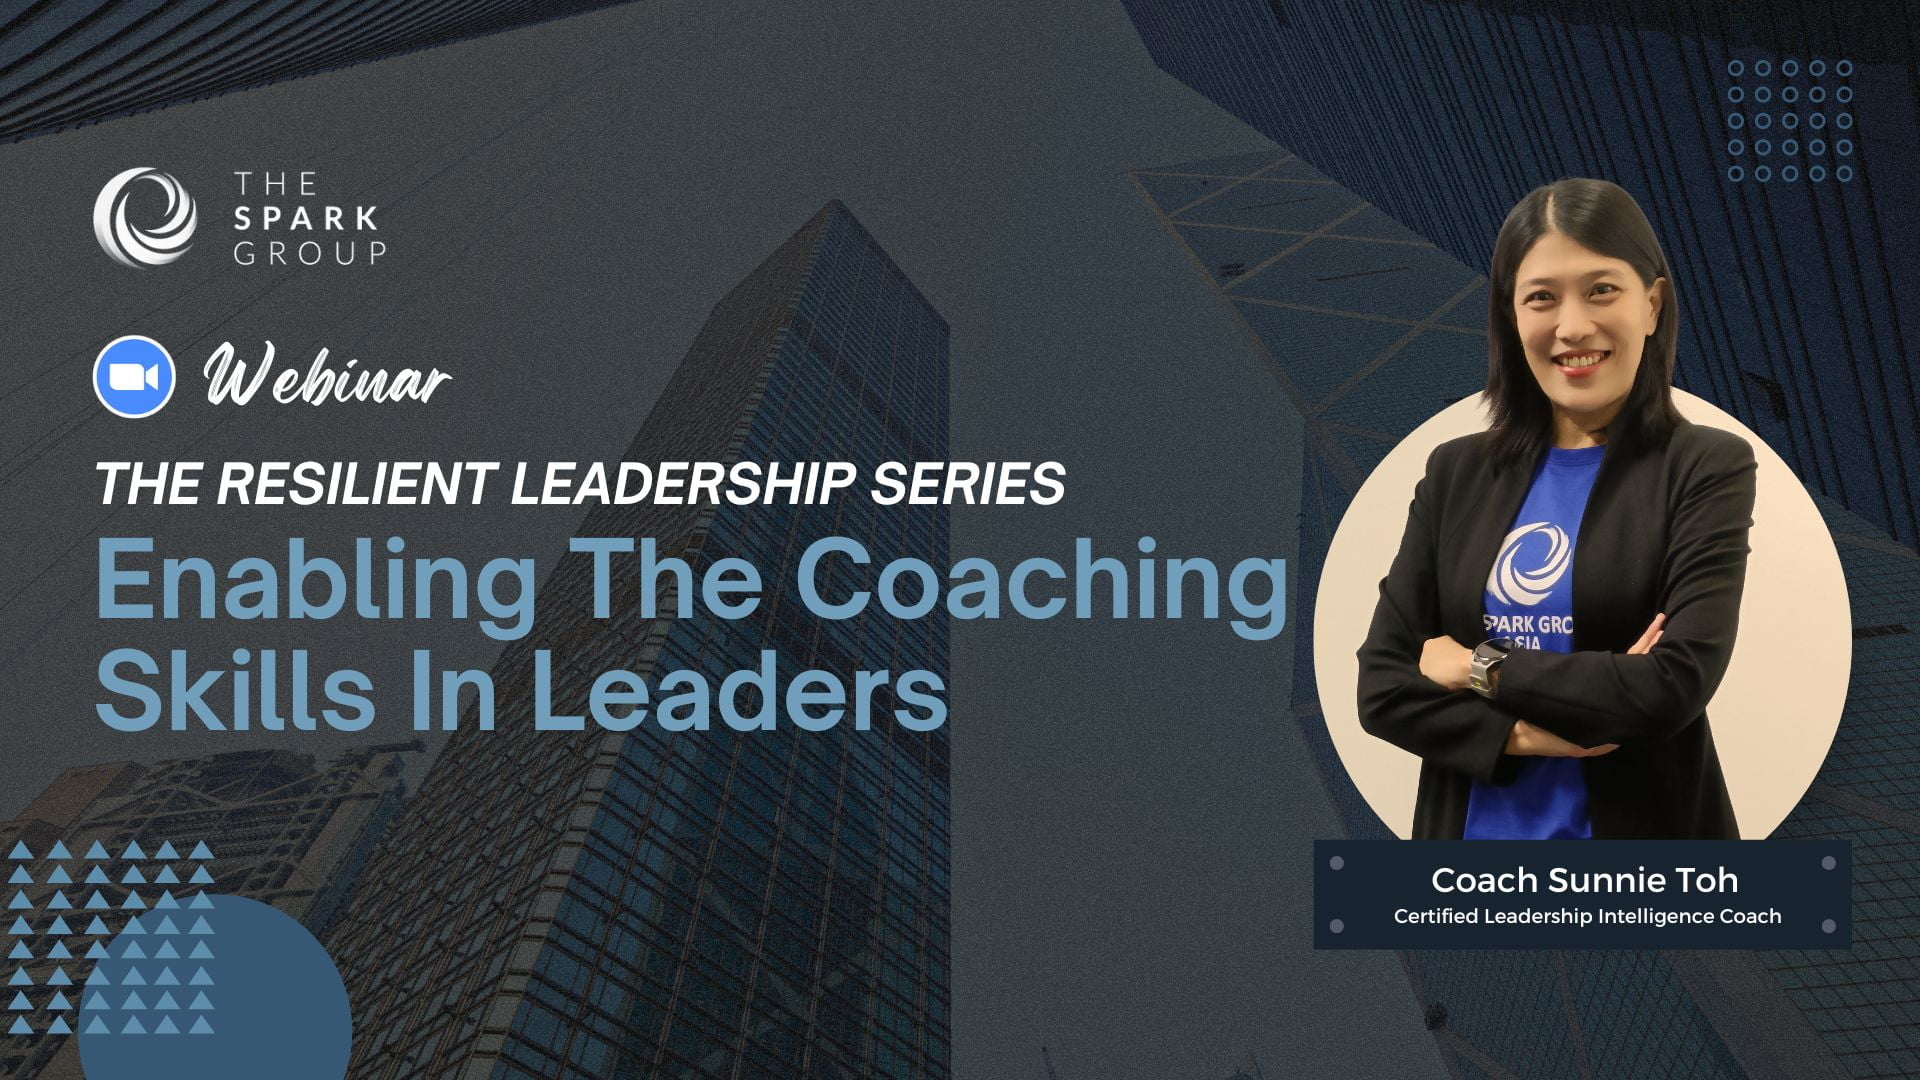 Leadership Training for Leaders - The Spark Group Asia